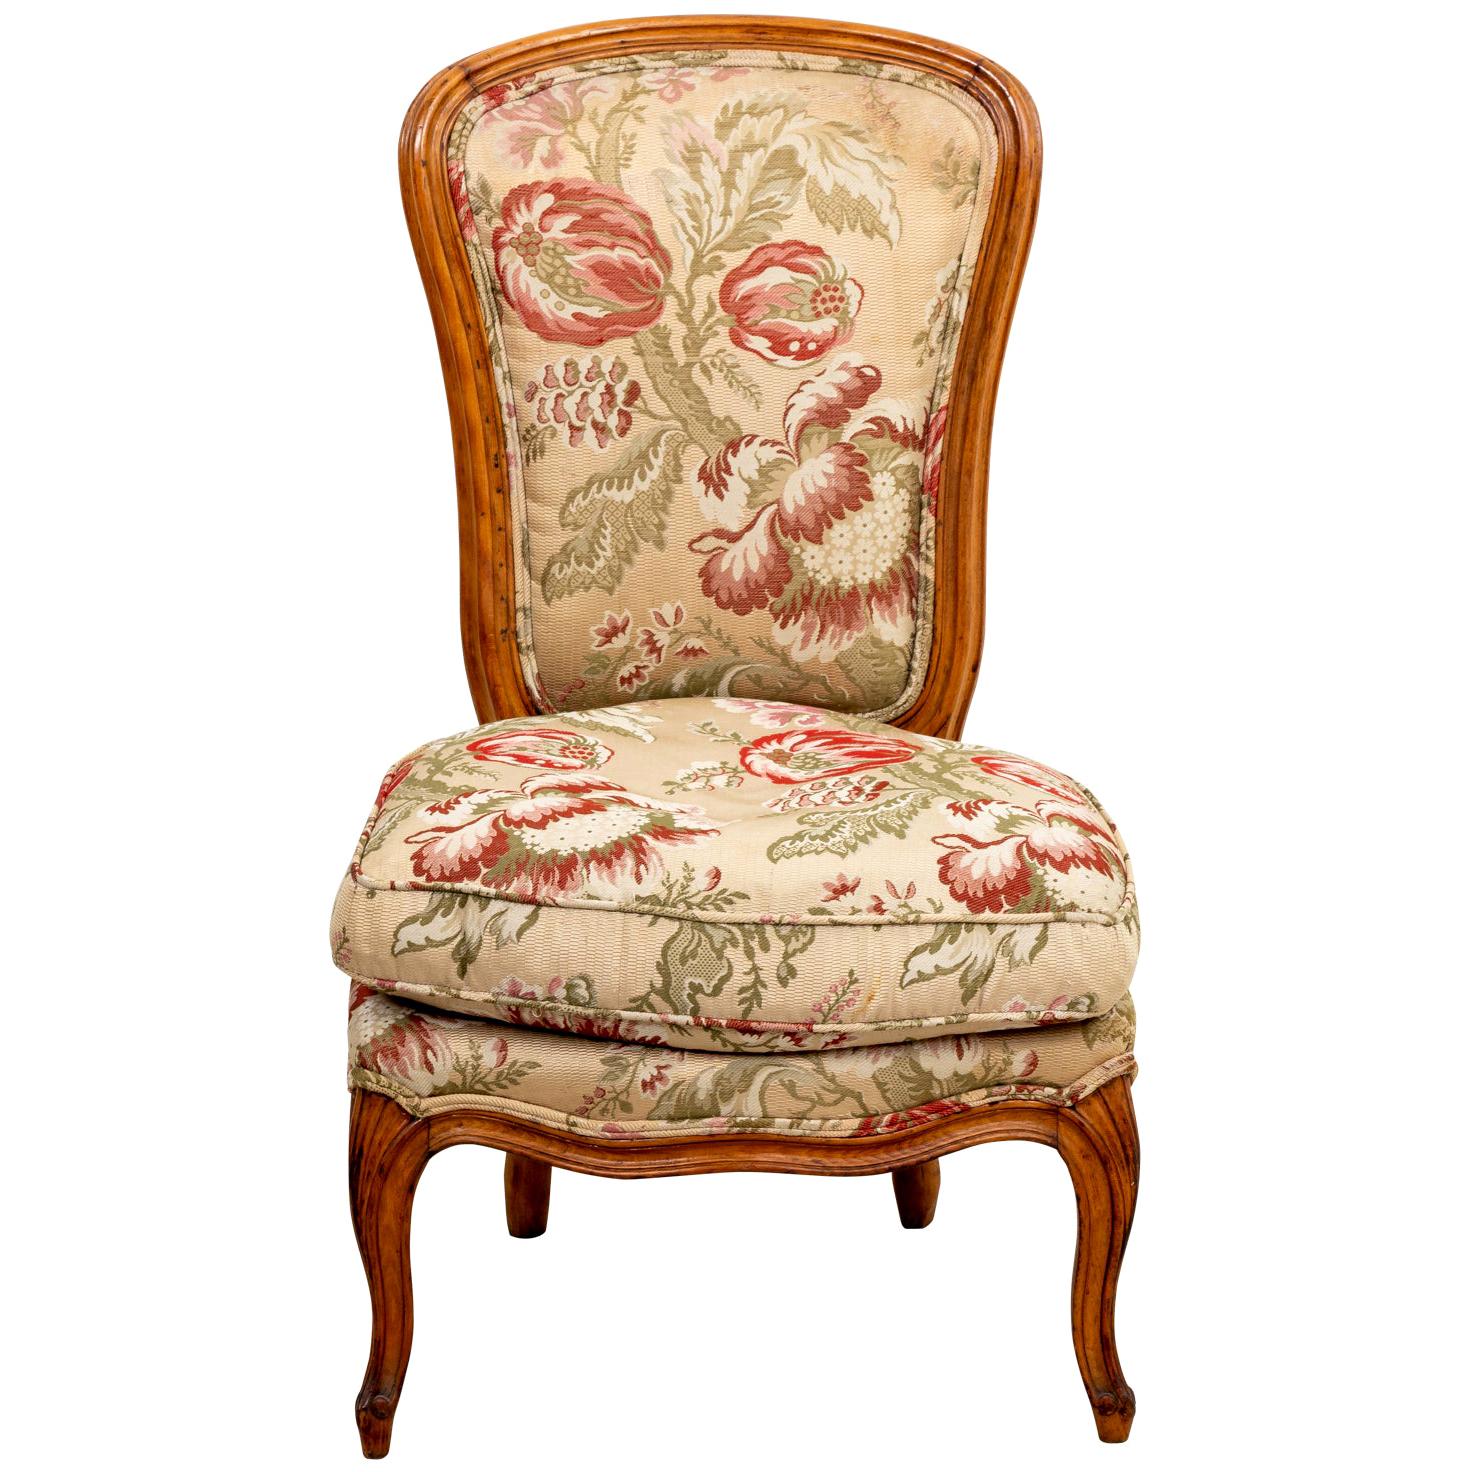 Upholstered Slipper Chair with Quilted Fabric